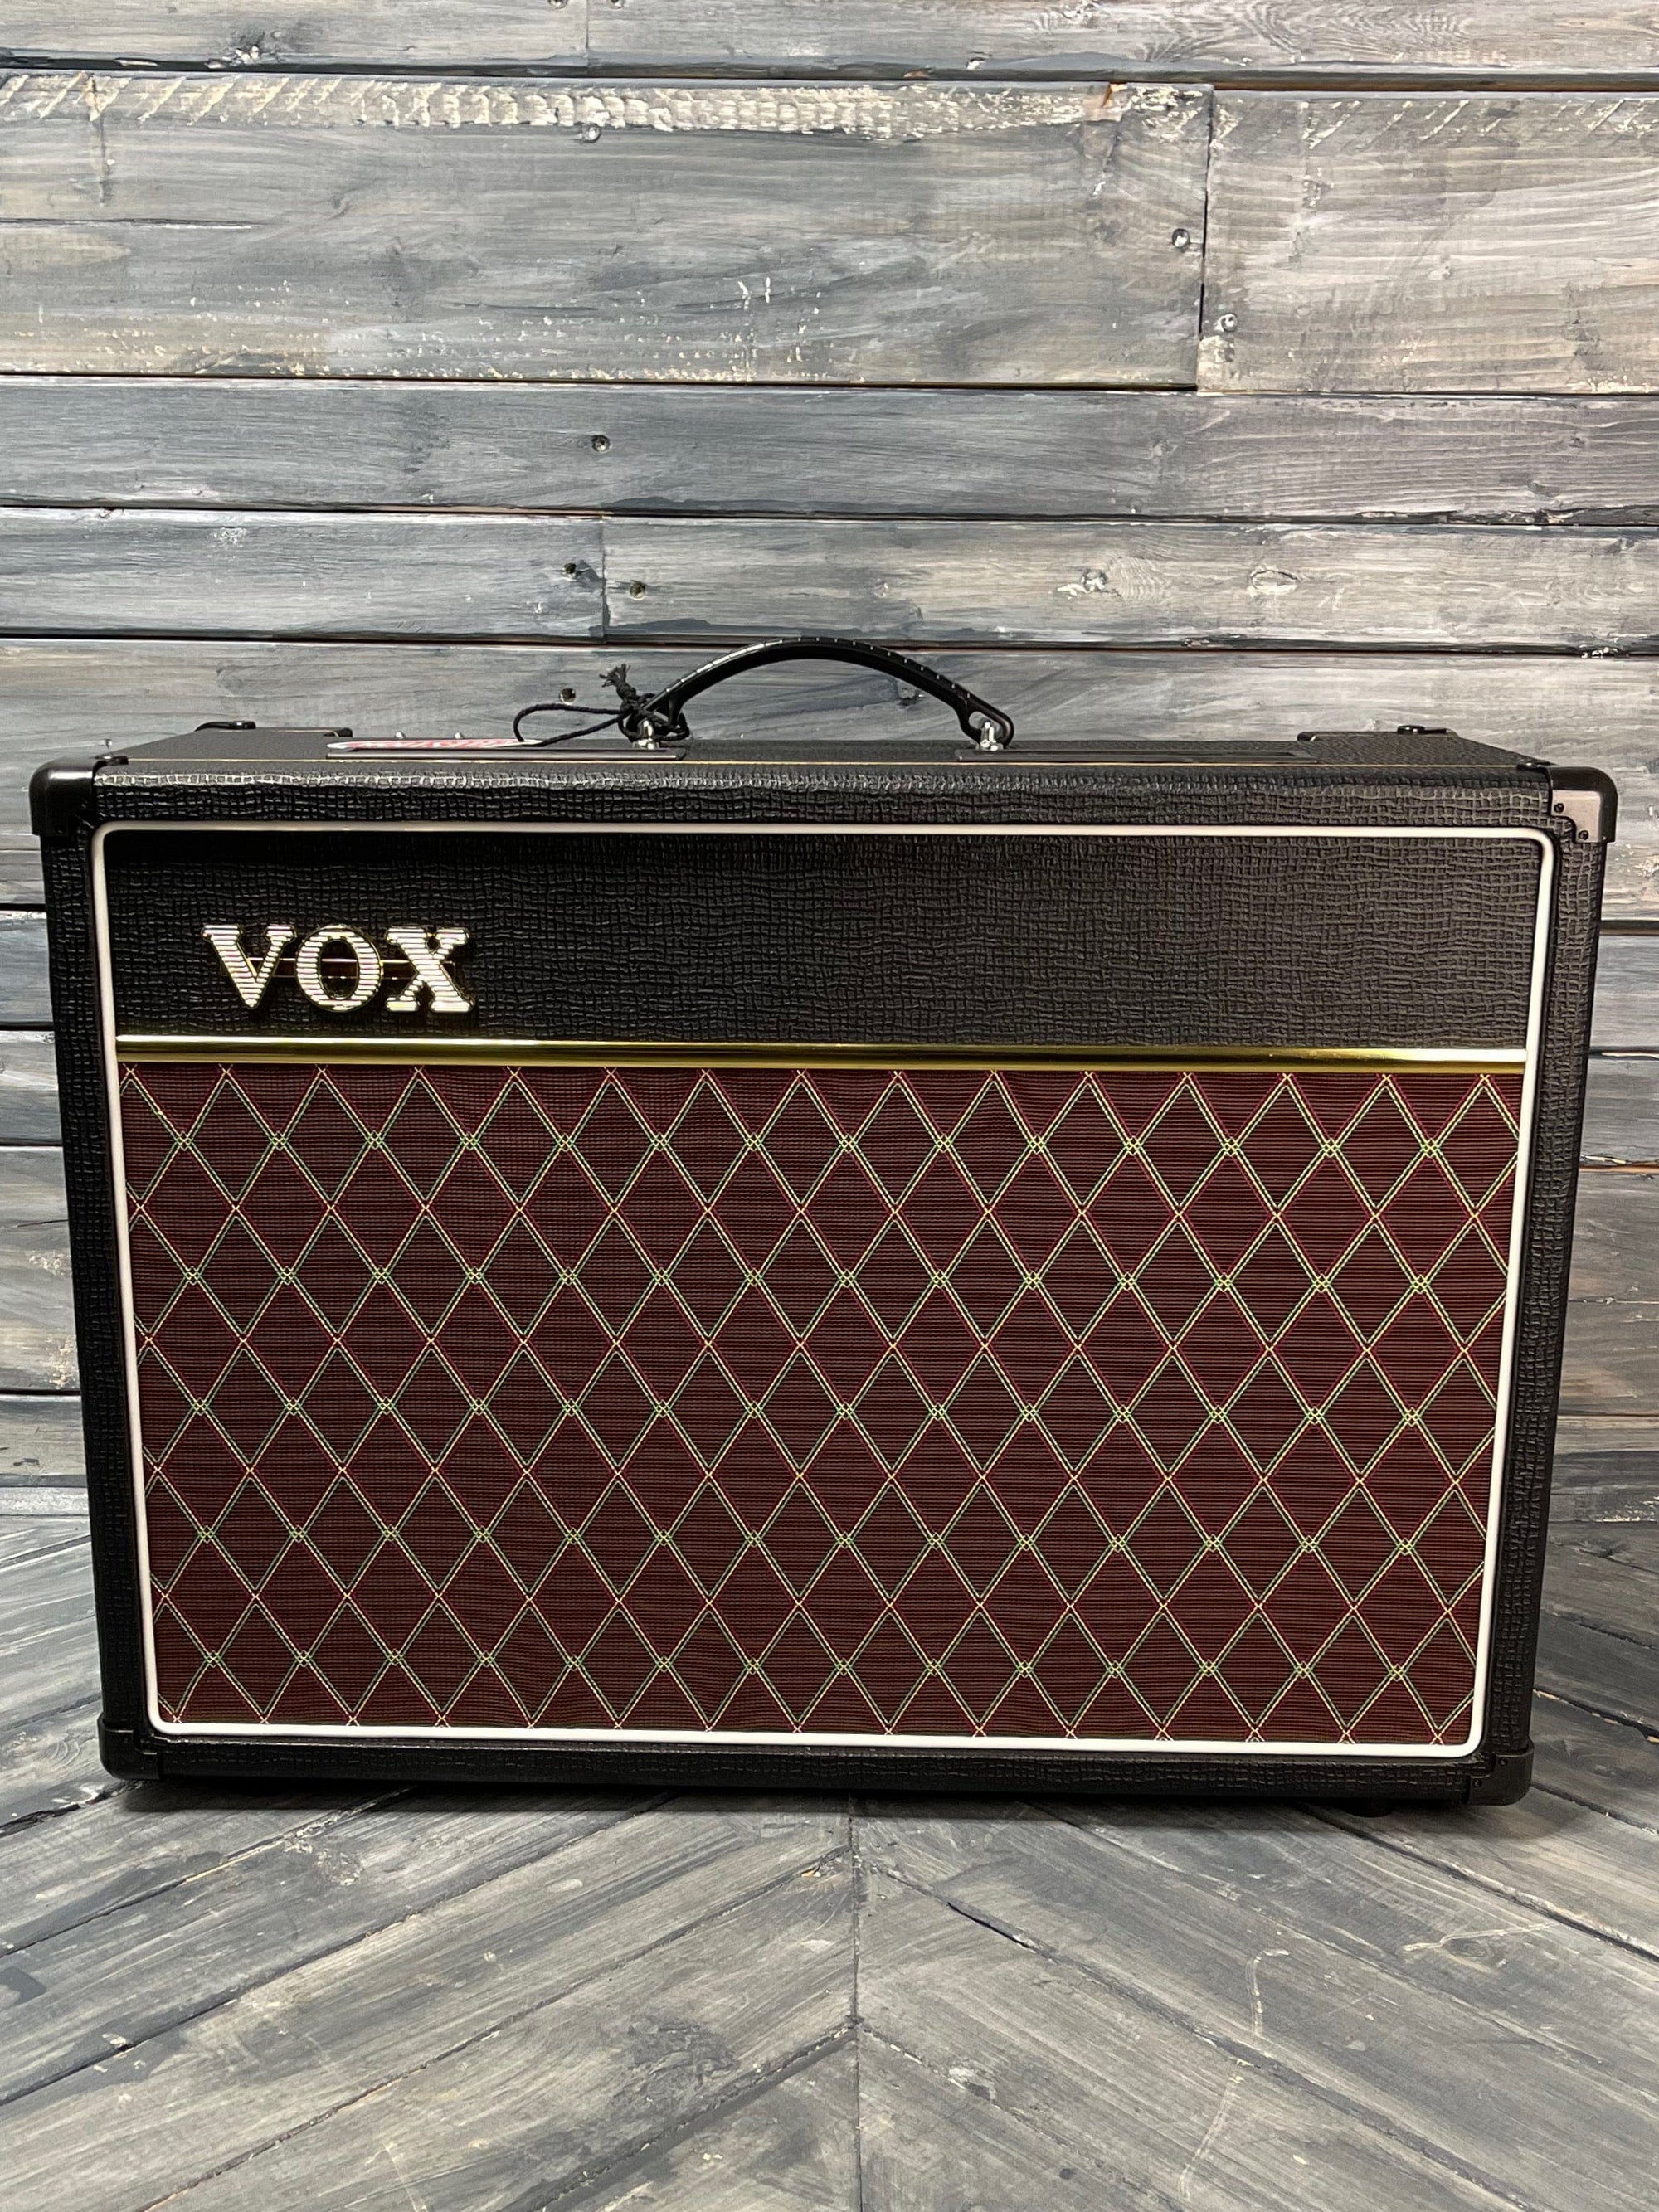 Vox AC15C1X view of front of the amp